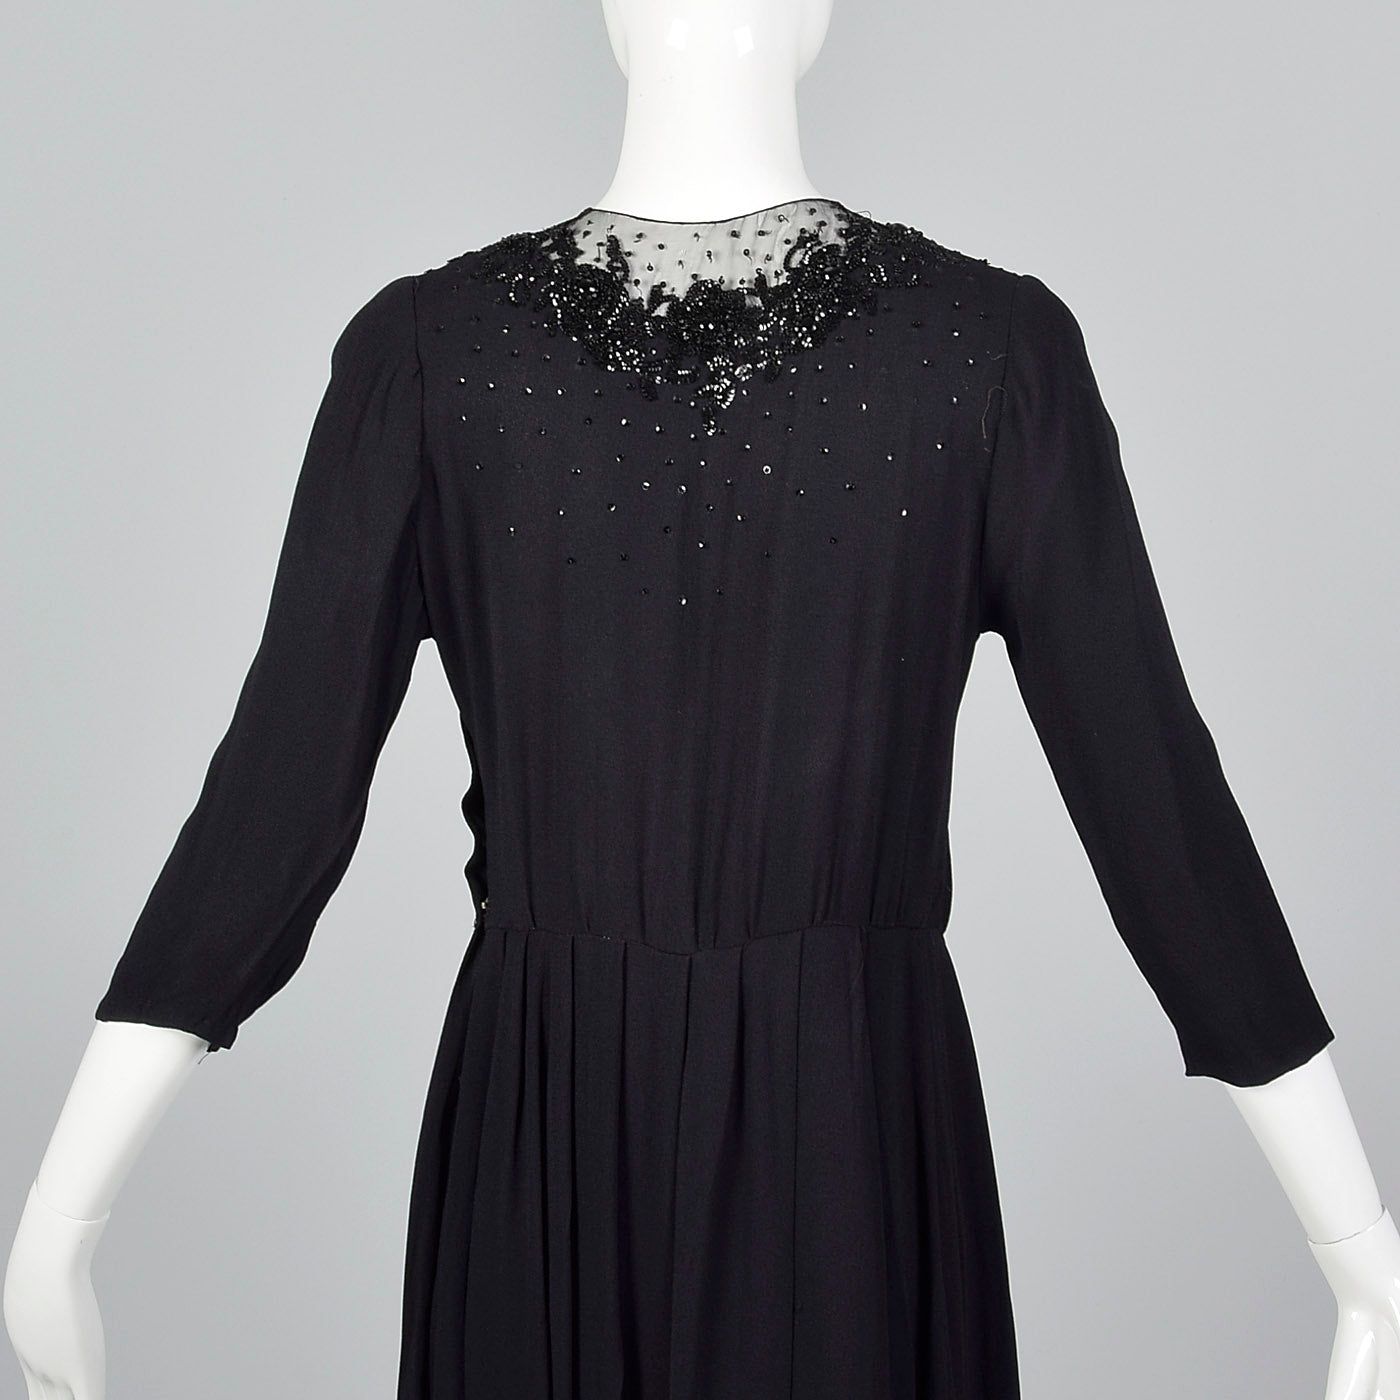 1930s Black Dress with Sequin and Mesh Detail